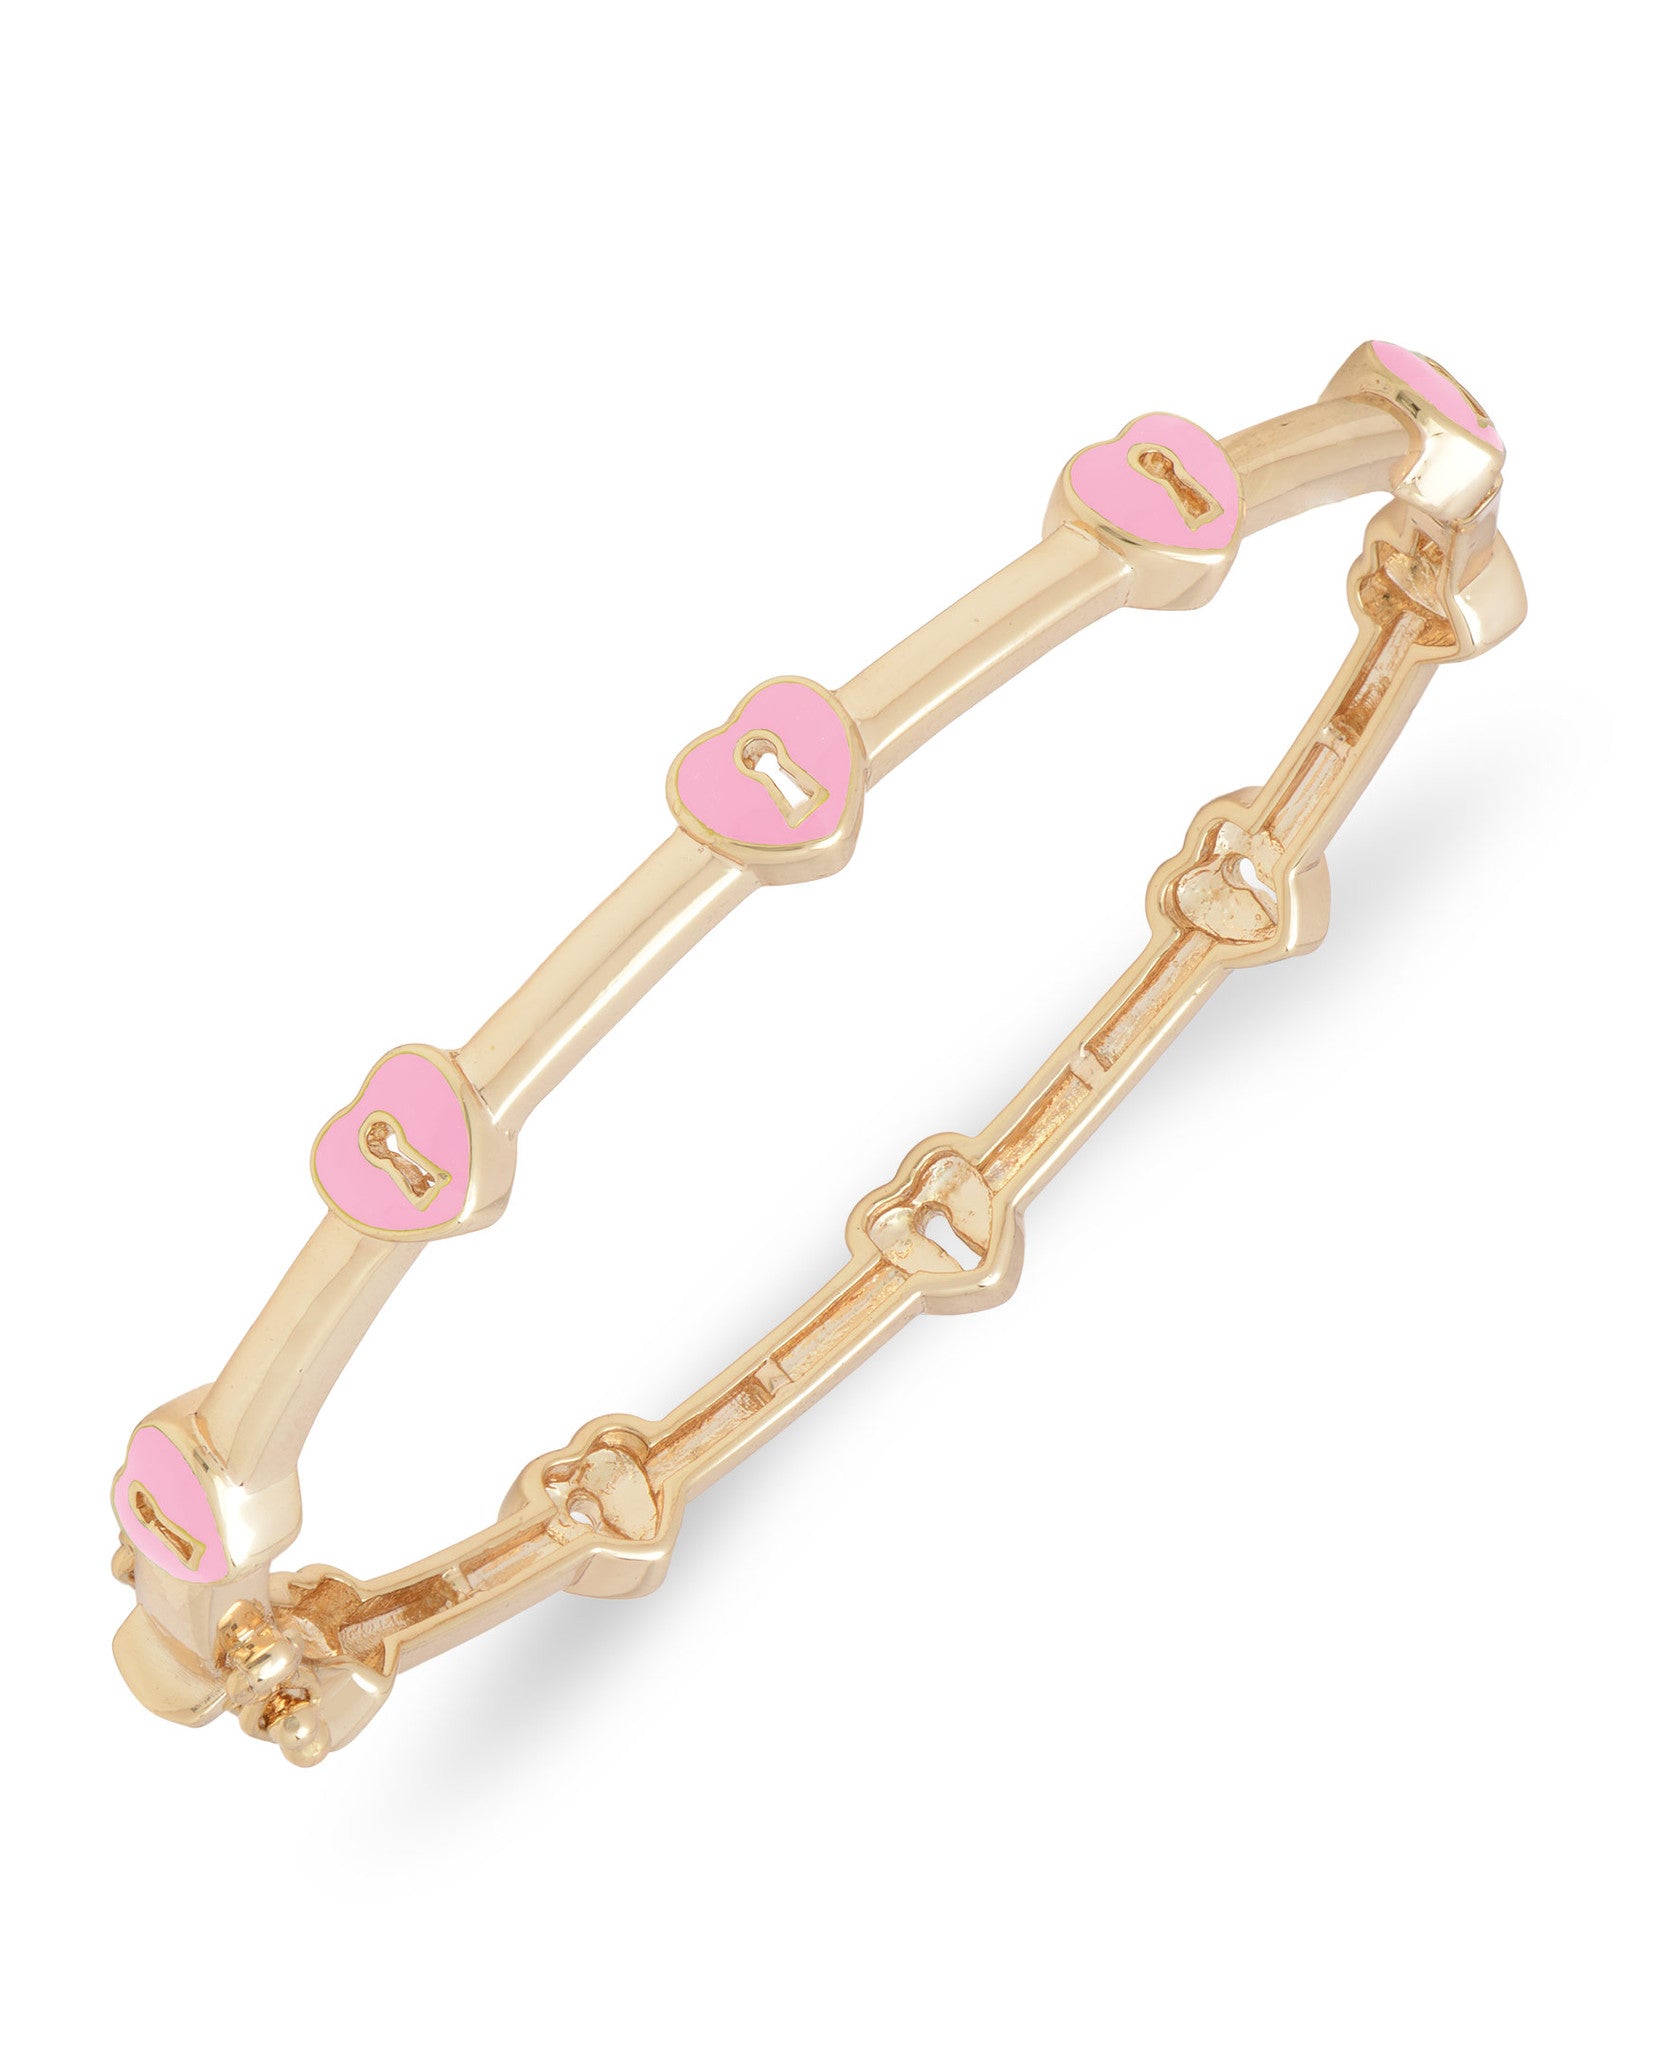 18k Gold-Plated Silver Girls ID Bracelet with Heart